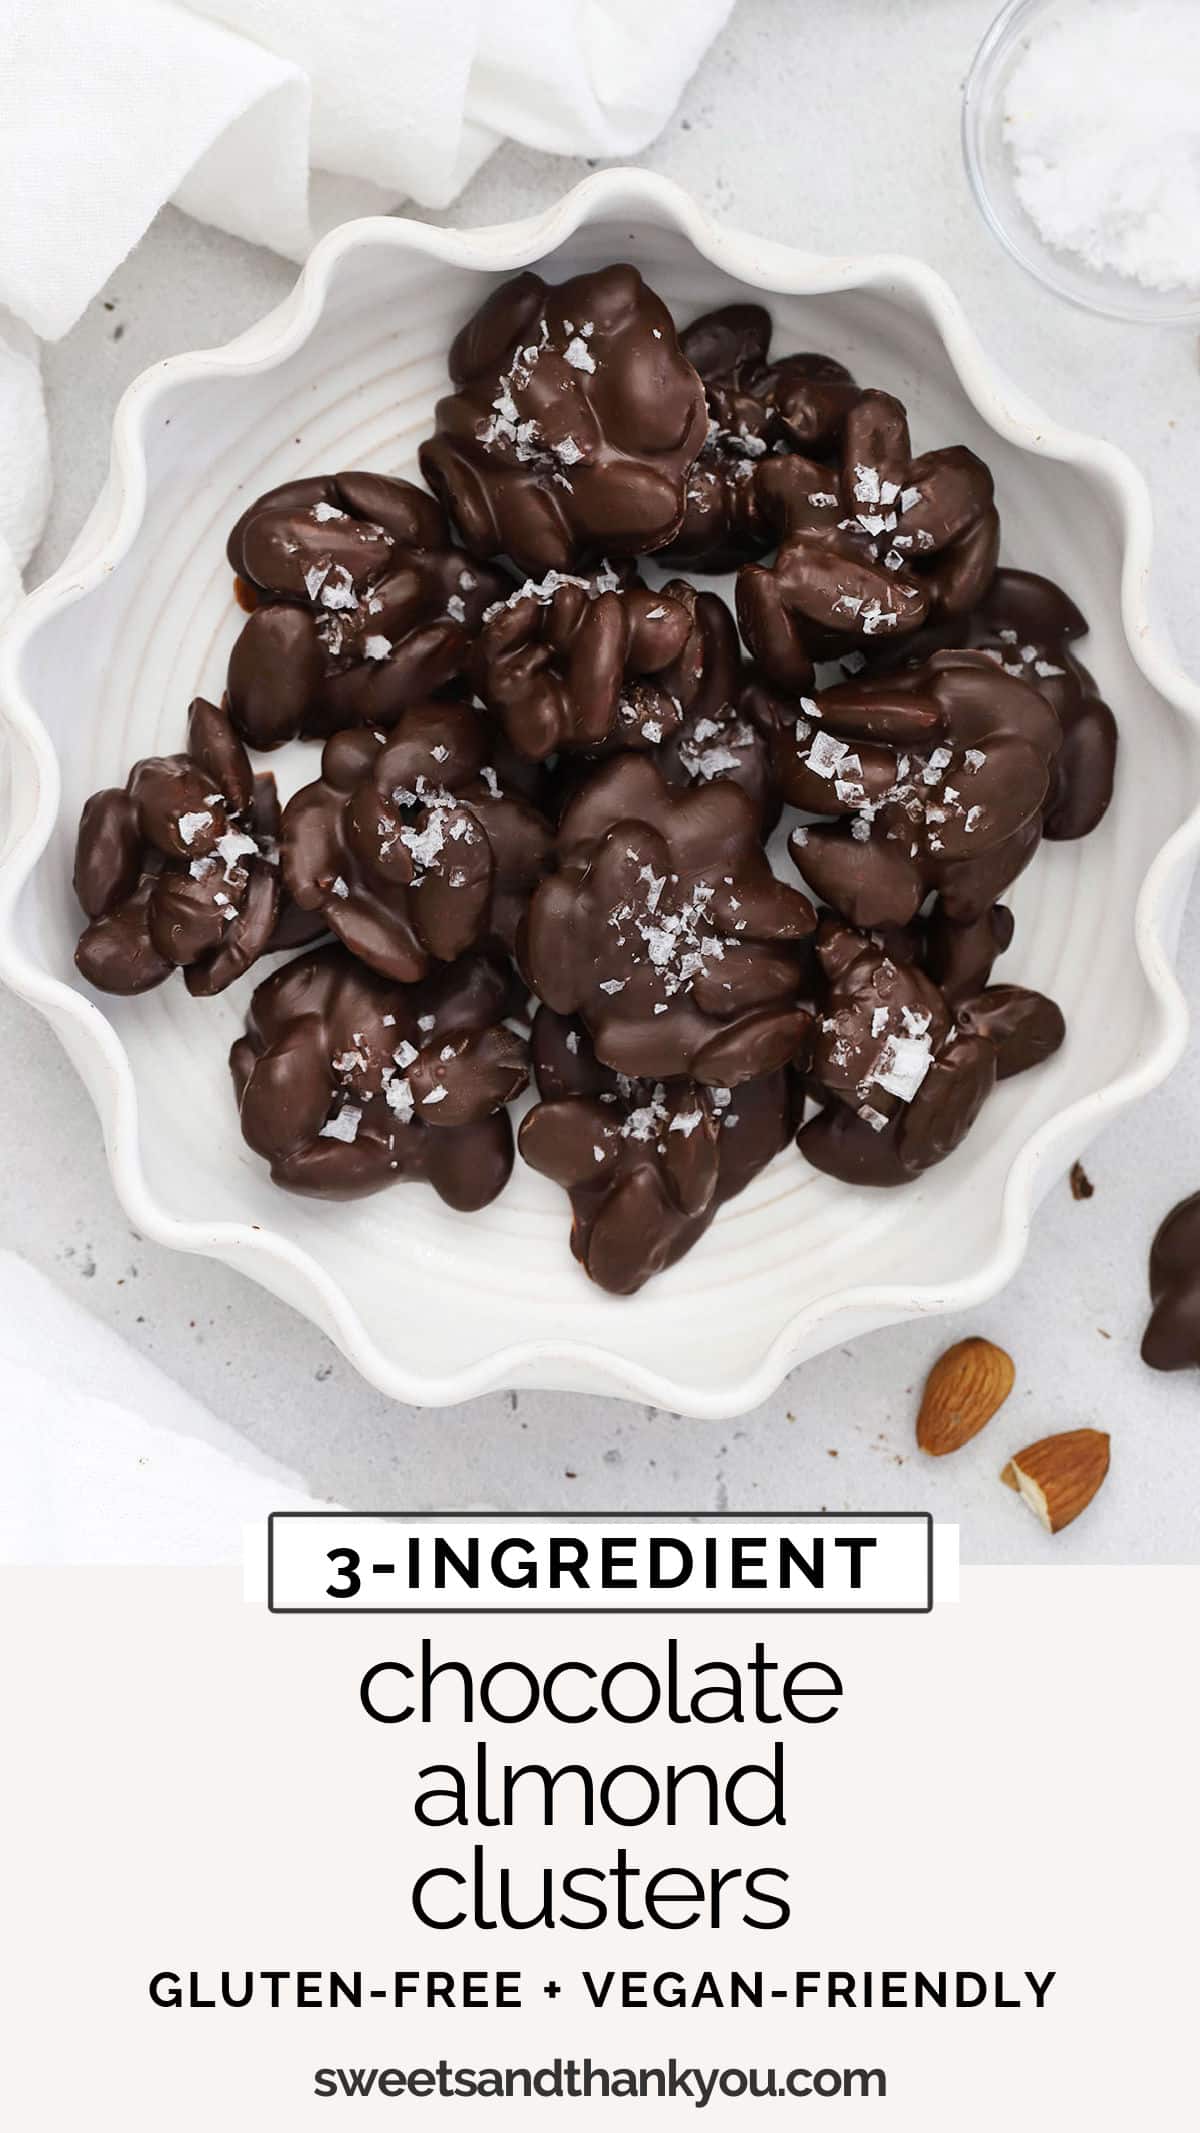 3-Ingredient Chocolate Almond Clusters have a satisfying salty-sweet crunch we can't get enough of. We love this no-bake treat! (Gluten-Free & Vegan-Friendly) // chocolate almond clusters recipe / healthy treat / healthy dessert / no-bake dessert / vegan dessert / gluten-free dessert / no-bake recipe / sweet snack / egg free dessert recipe / 